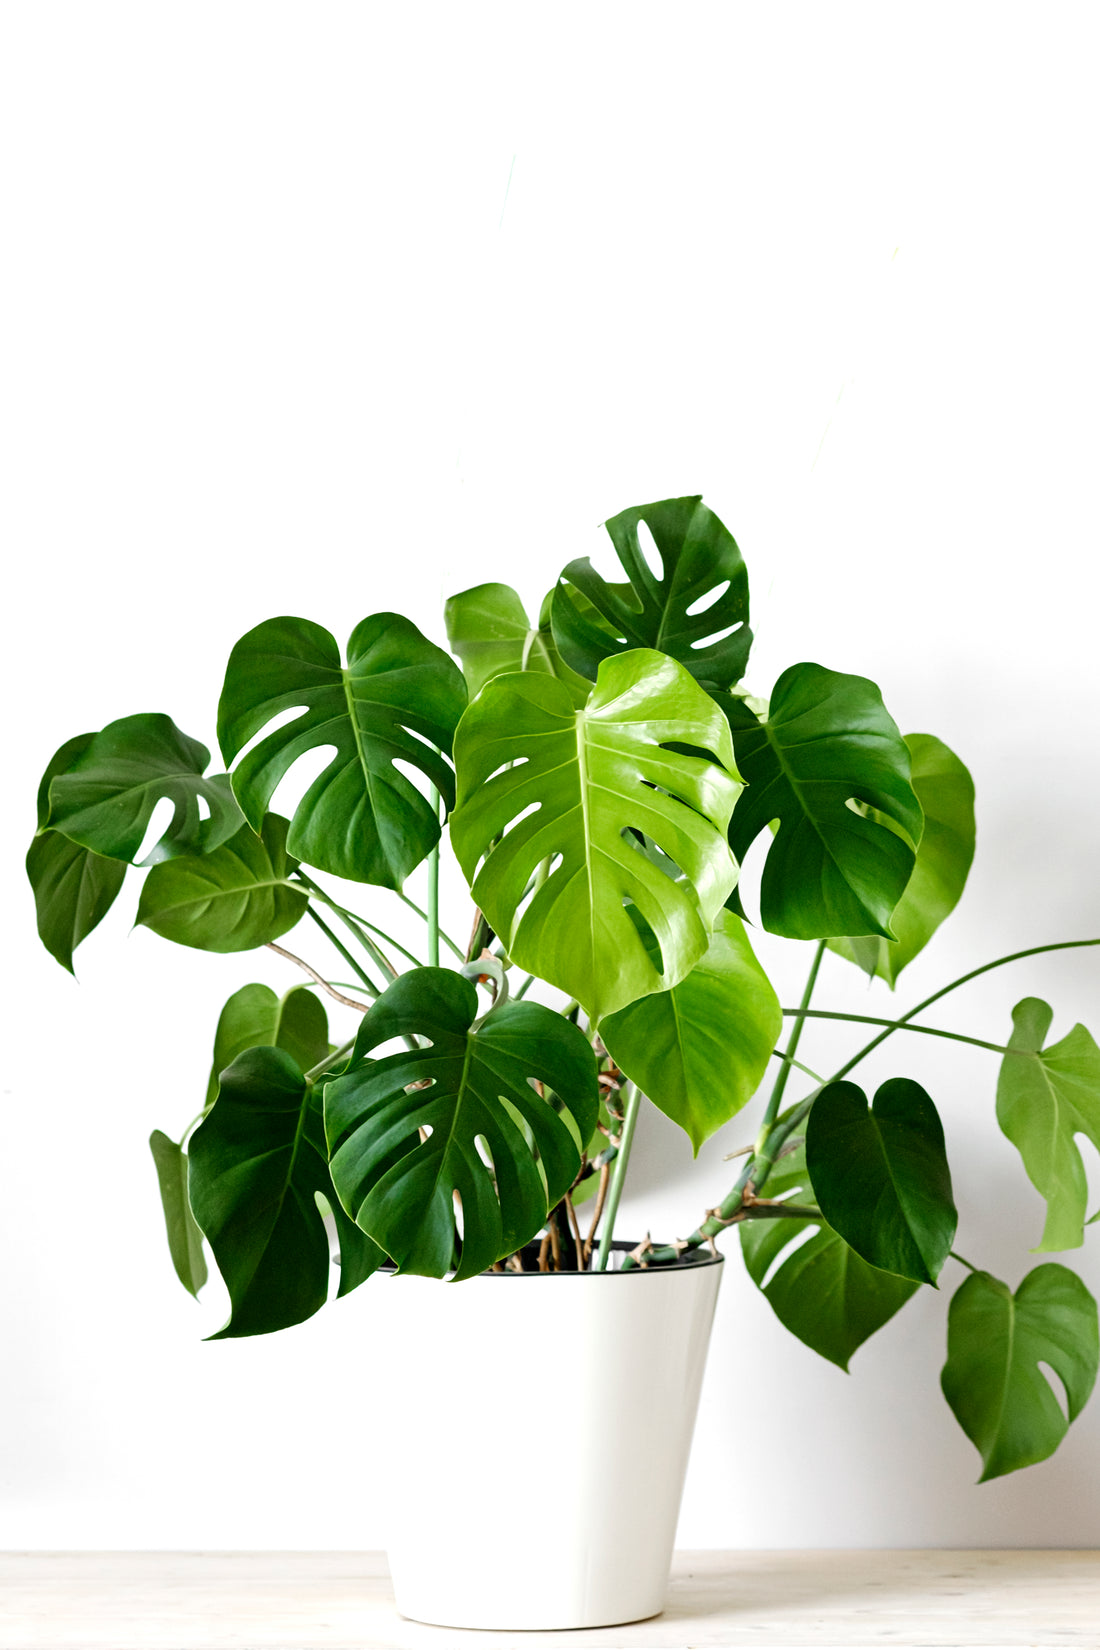 5 Expert Tips for Caring for Your Monstera Deliciosa or Swiss Cheese Plant